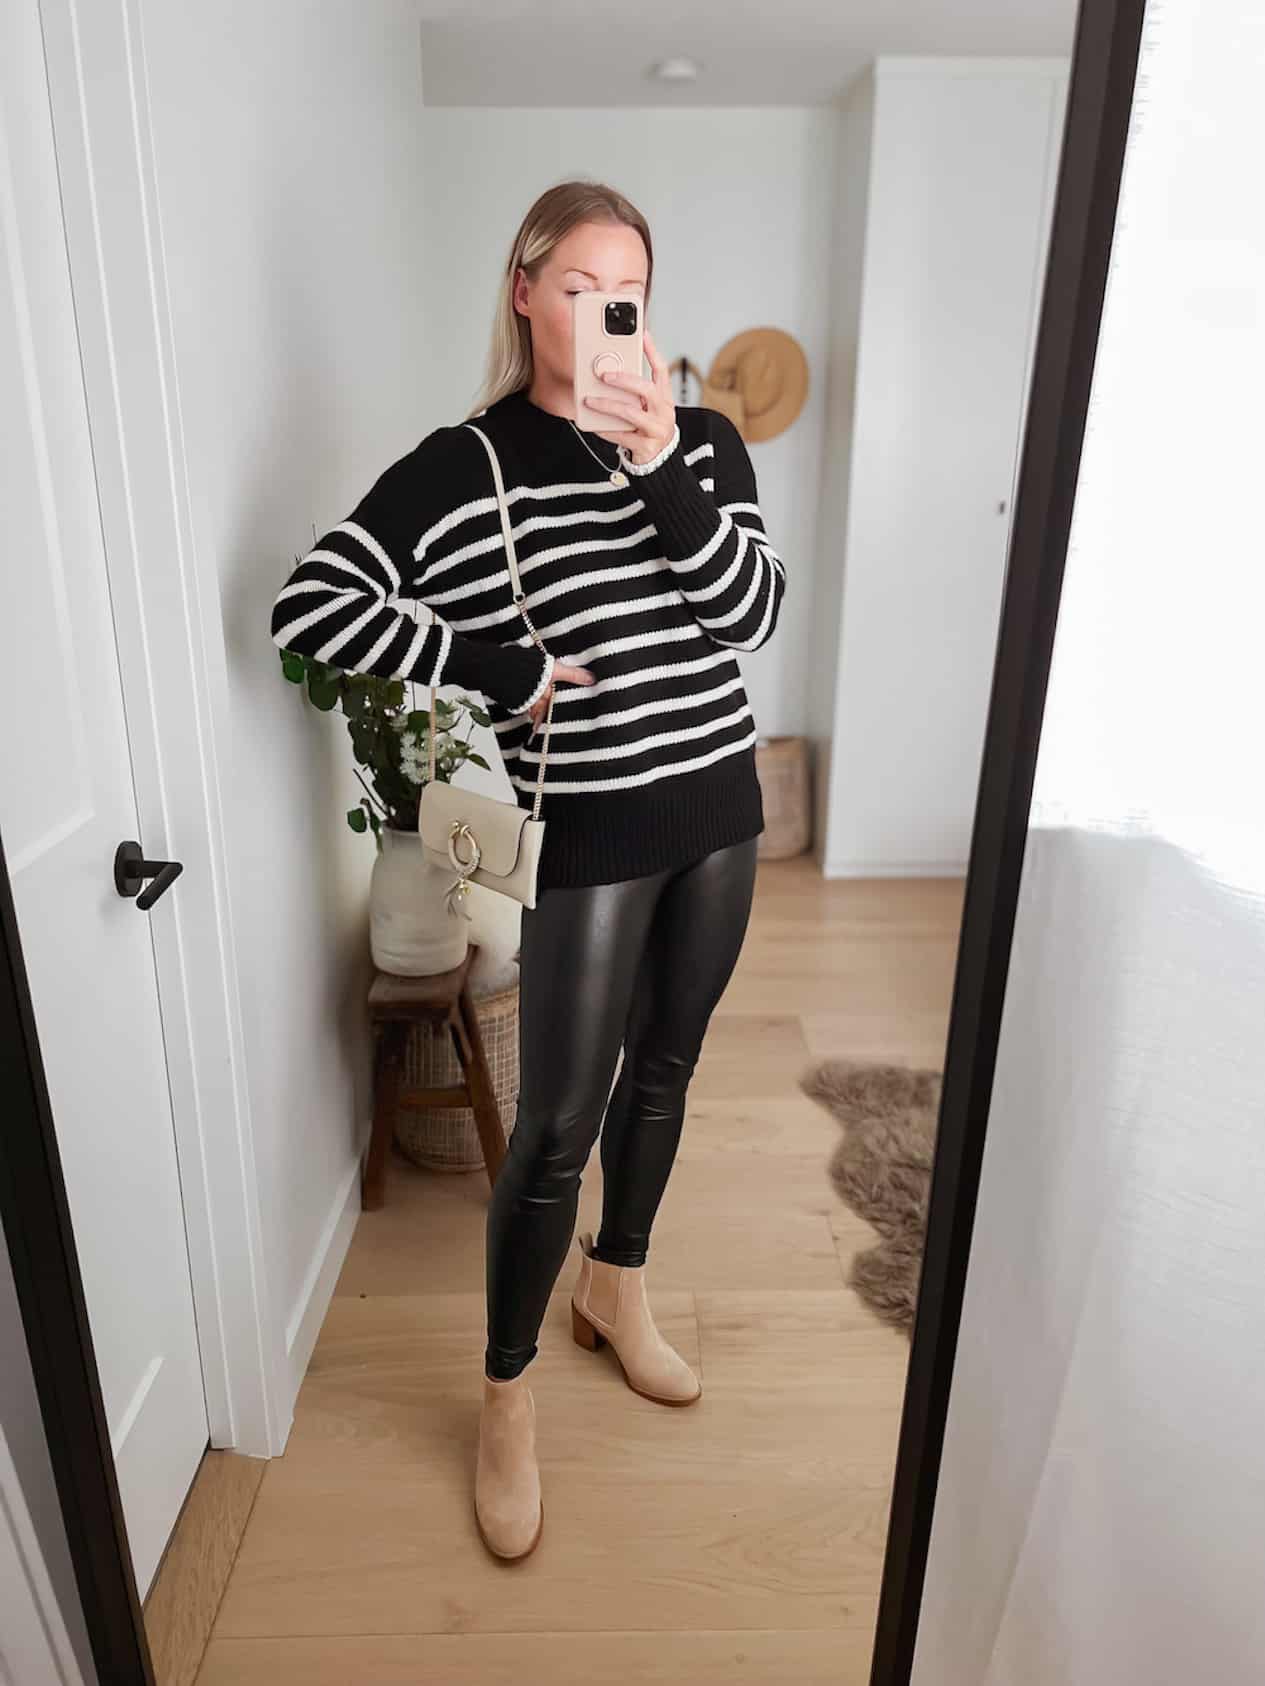 Woman wearing black leather leggings and a black and white striped sweater.